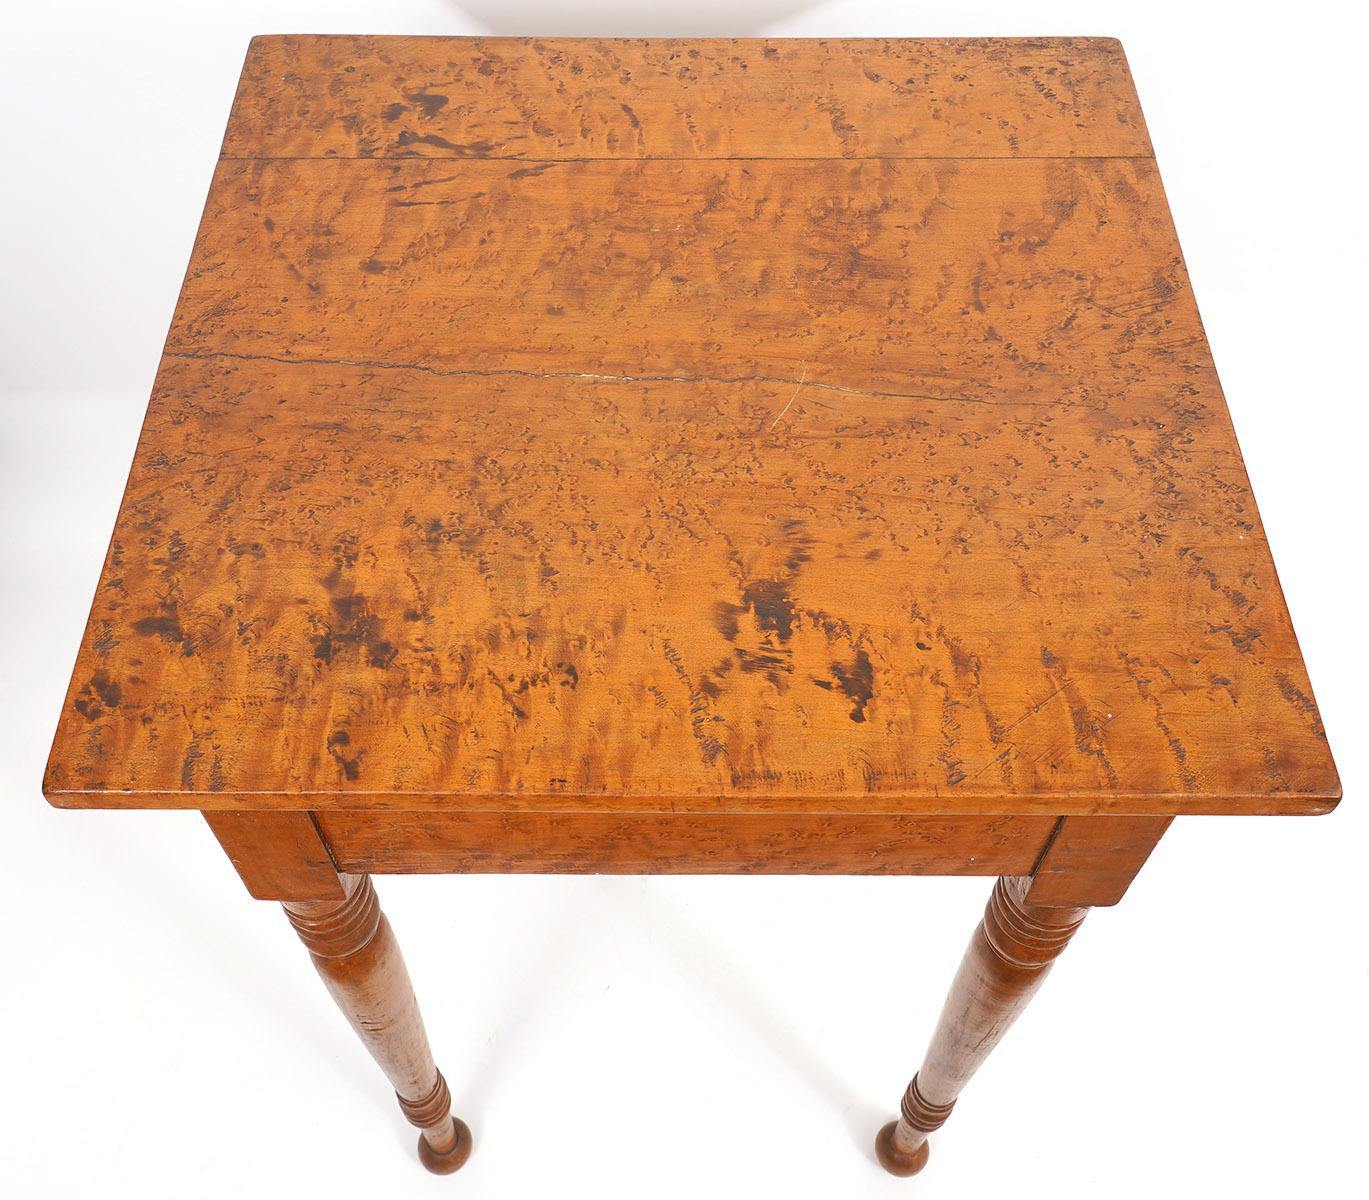 19th Century American Federal Birdseye Maple Work Table with Turned Legs and Ball Feet